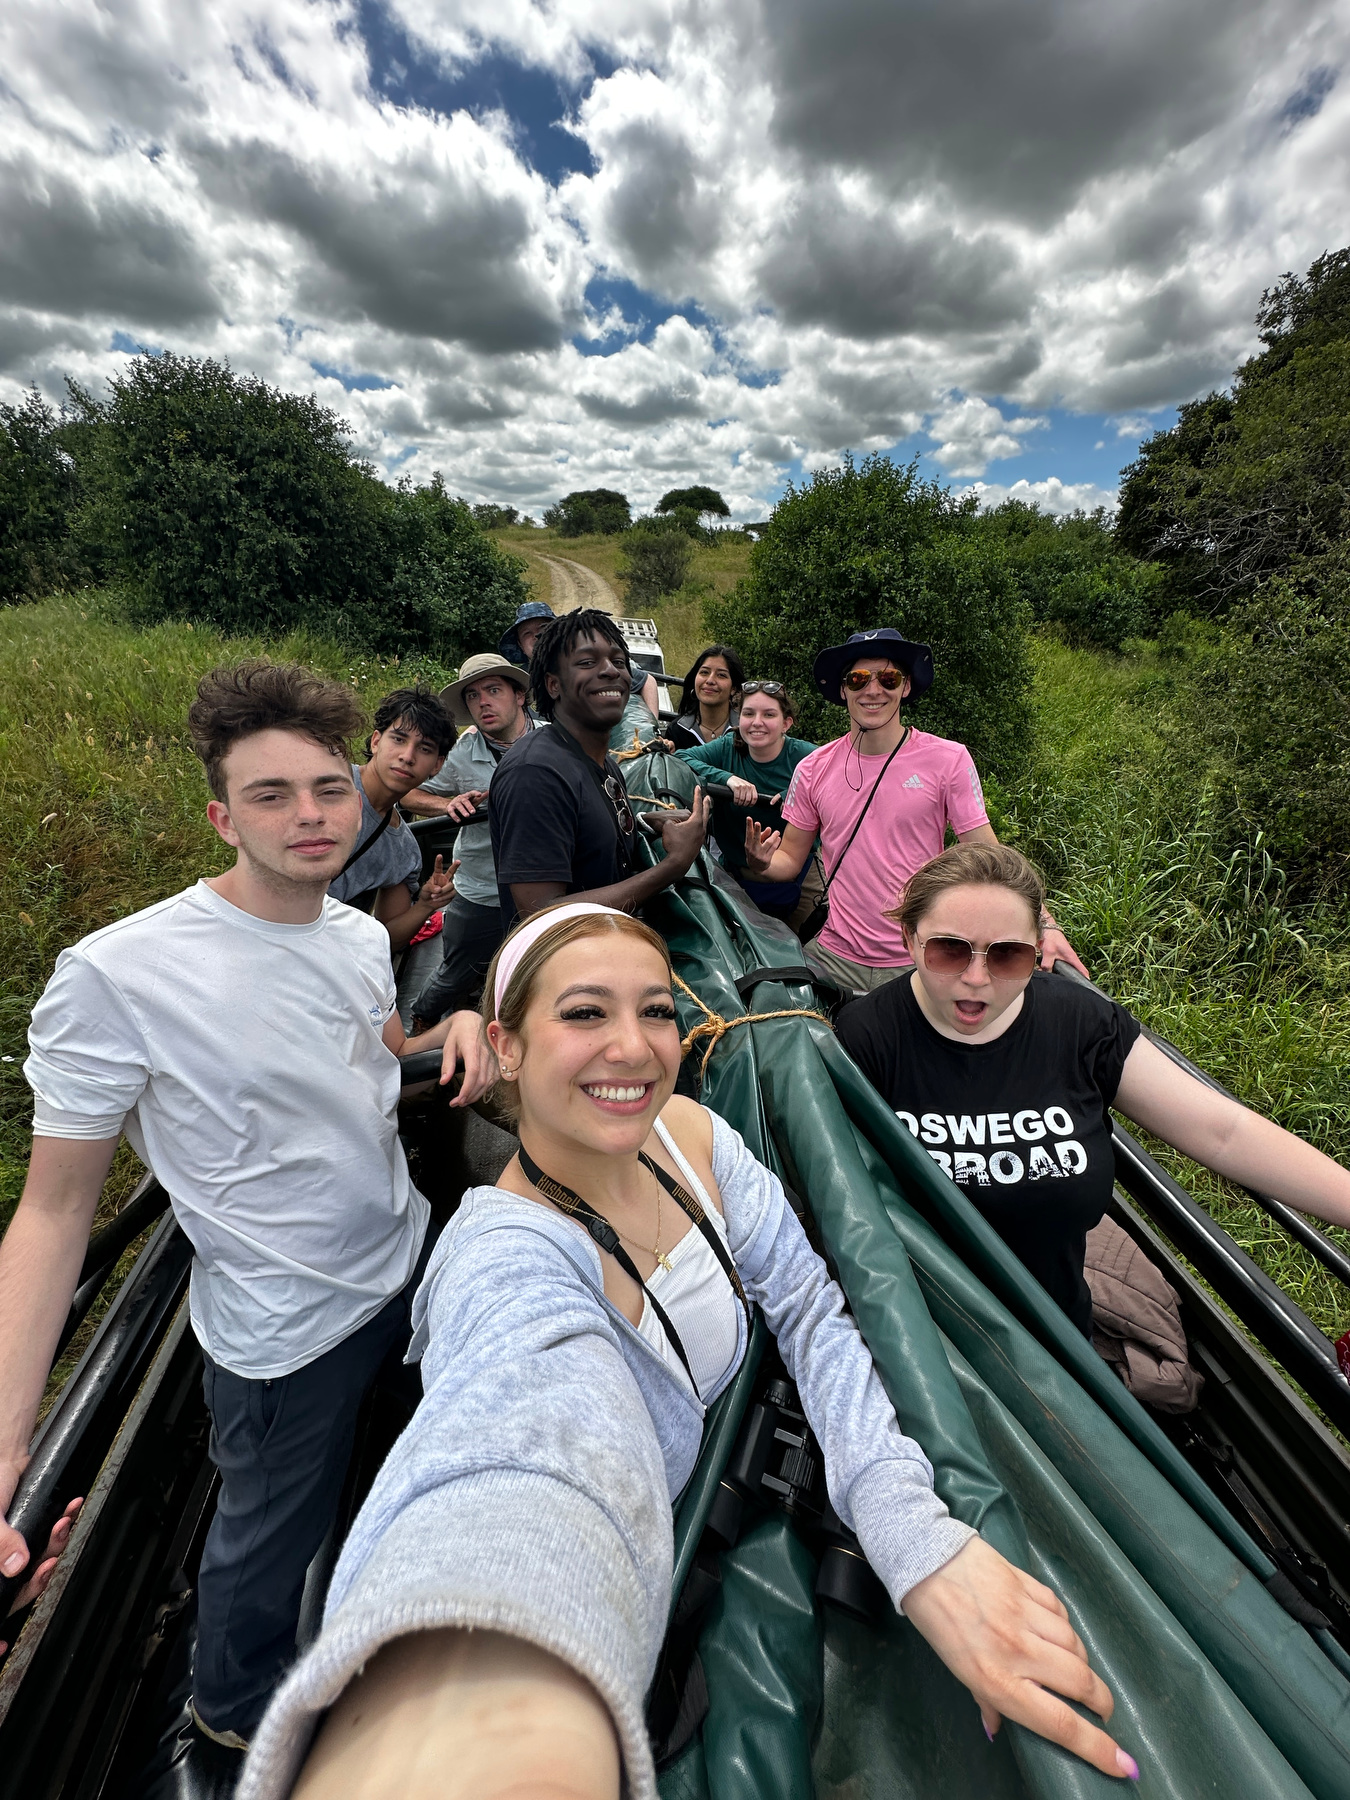 Biological sciences faculty members Karen Sime and Susan Hammerly brought students to Tanzania for their two week “Biodiversity and Conservation course.” The class traveled across northern Tanzania and learned about wildlife conservation from local biologists.